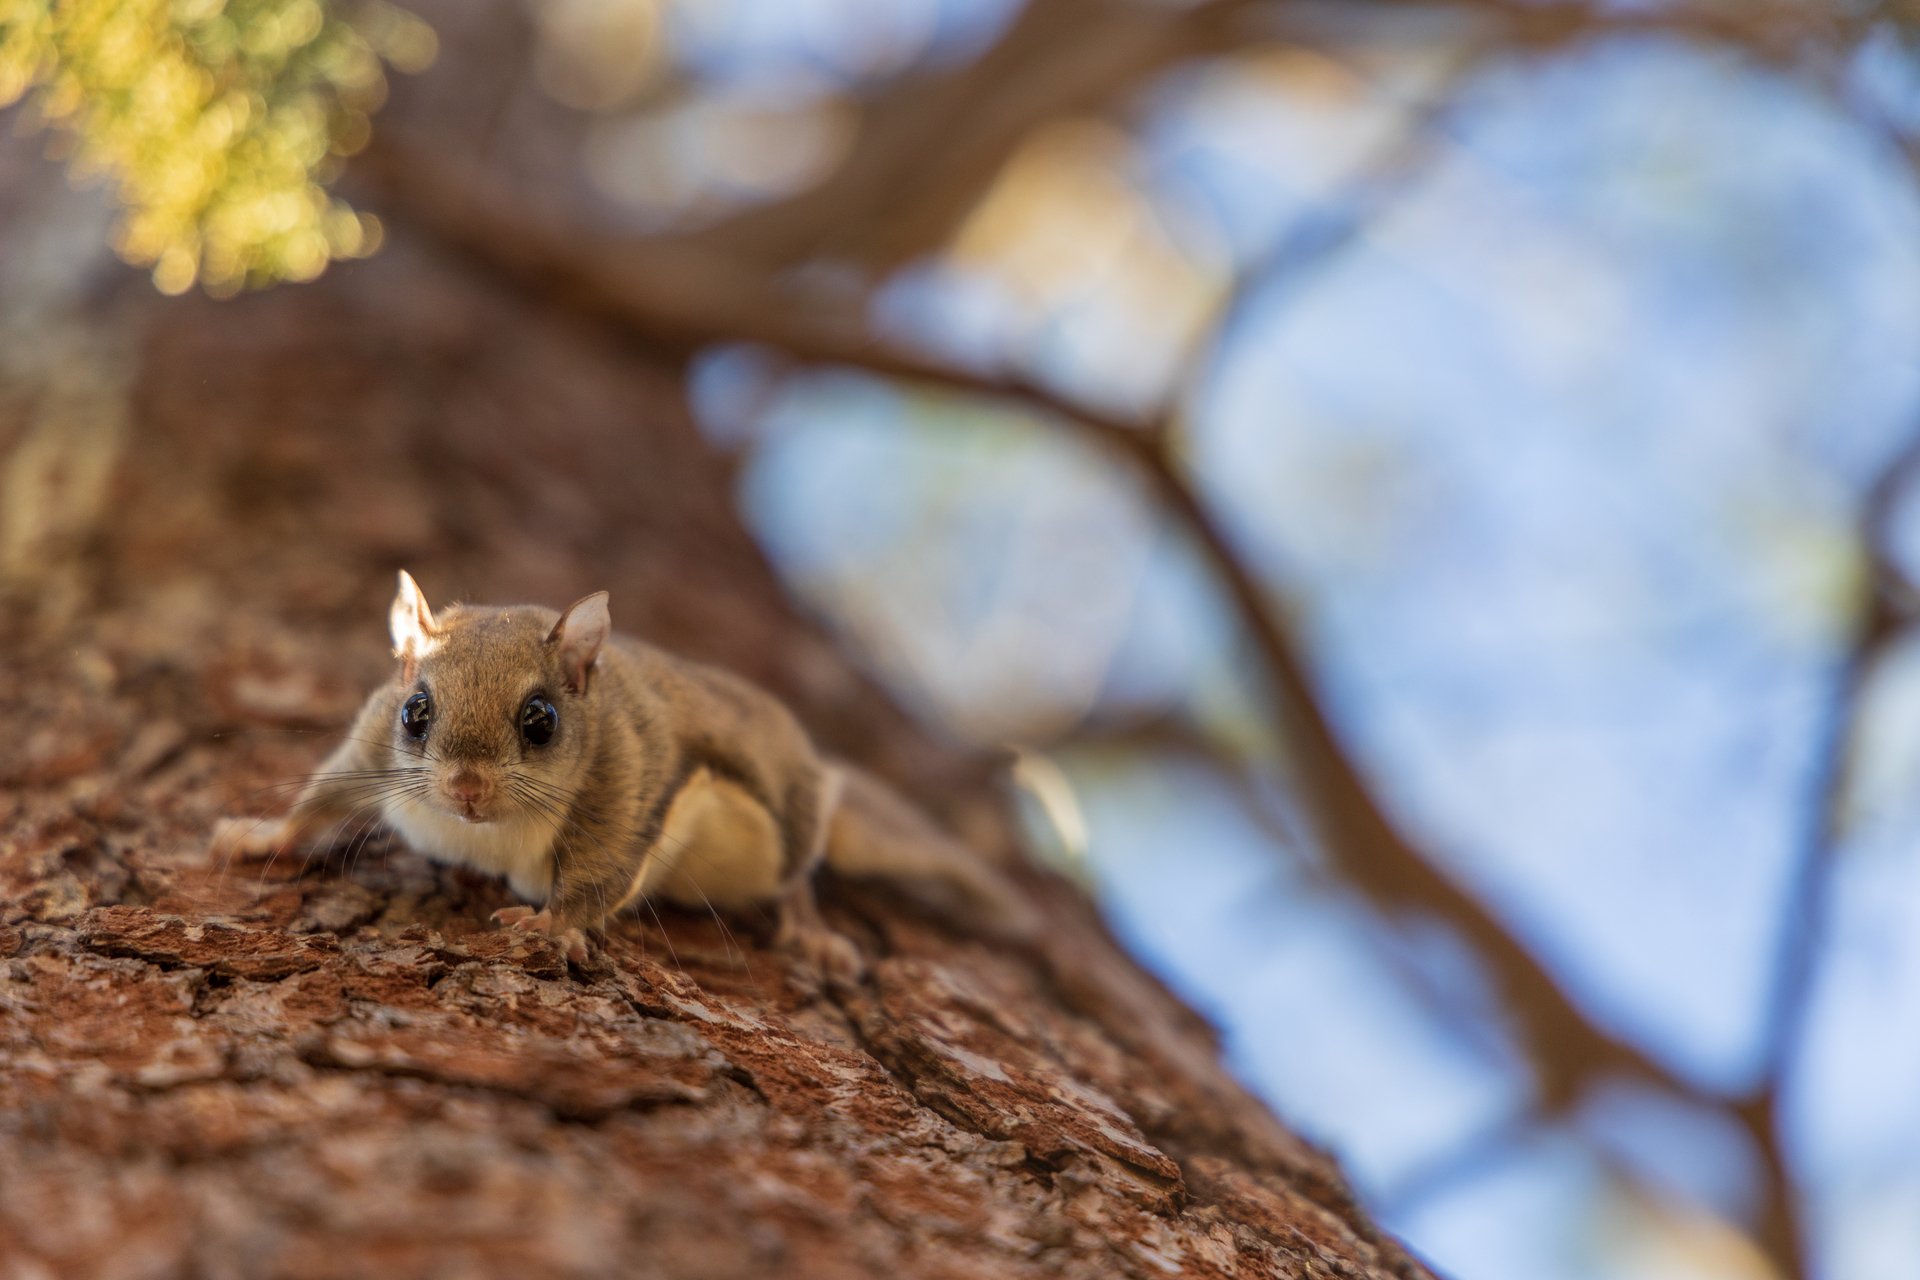 A small squirrel climbing down a tree, looking at the camera.